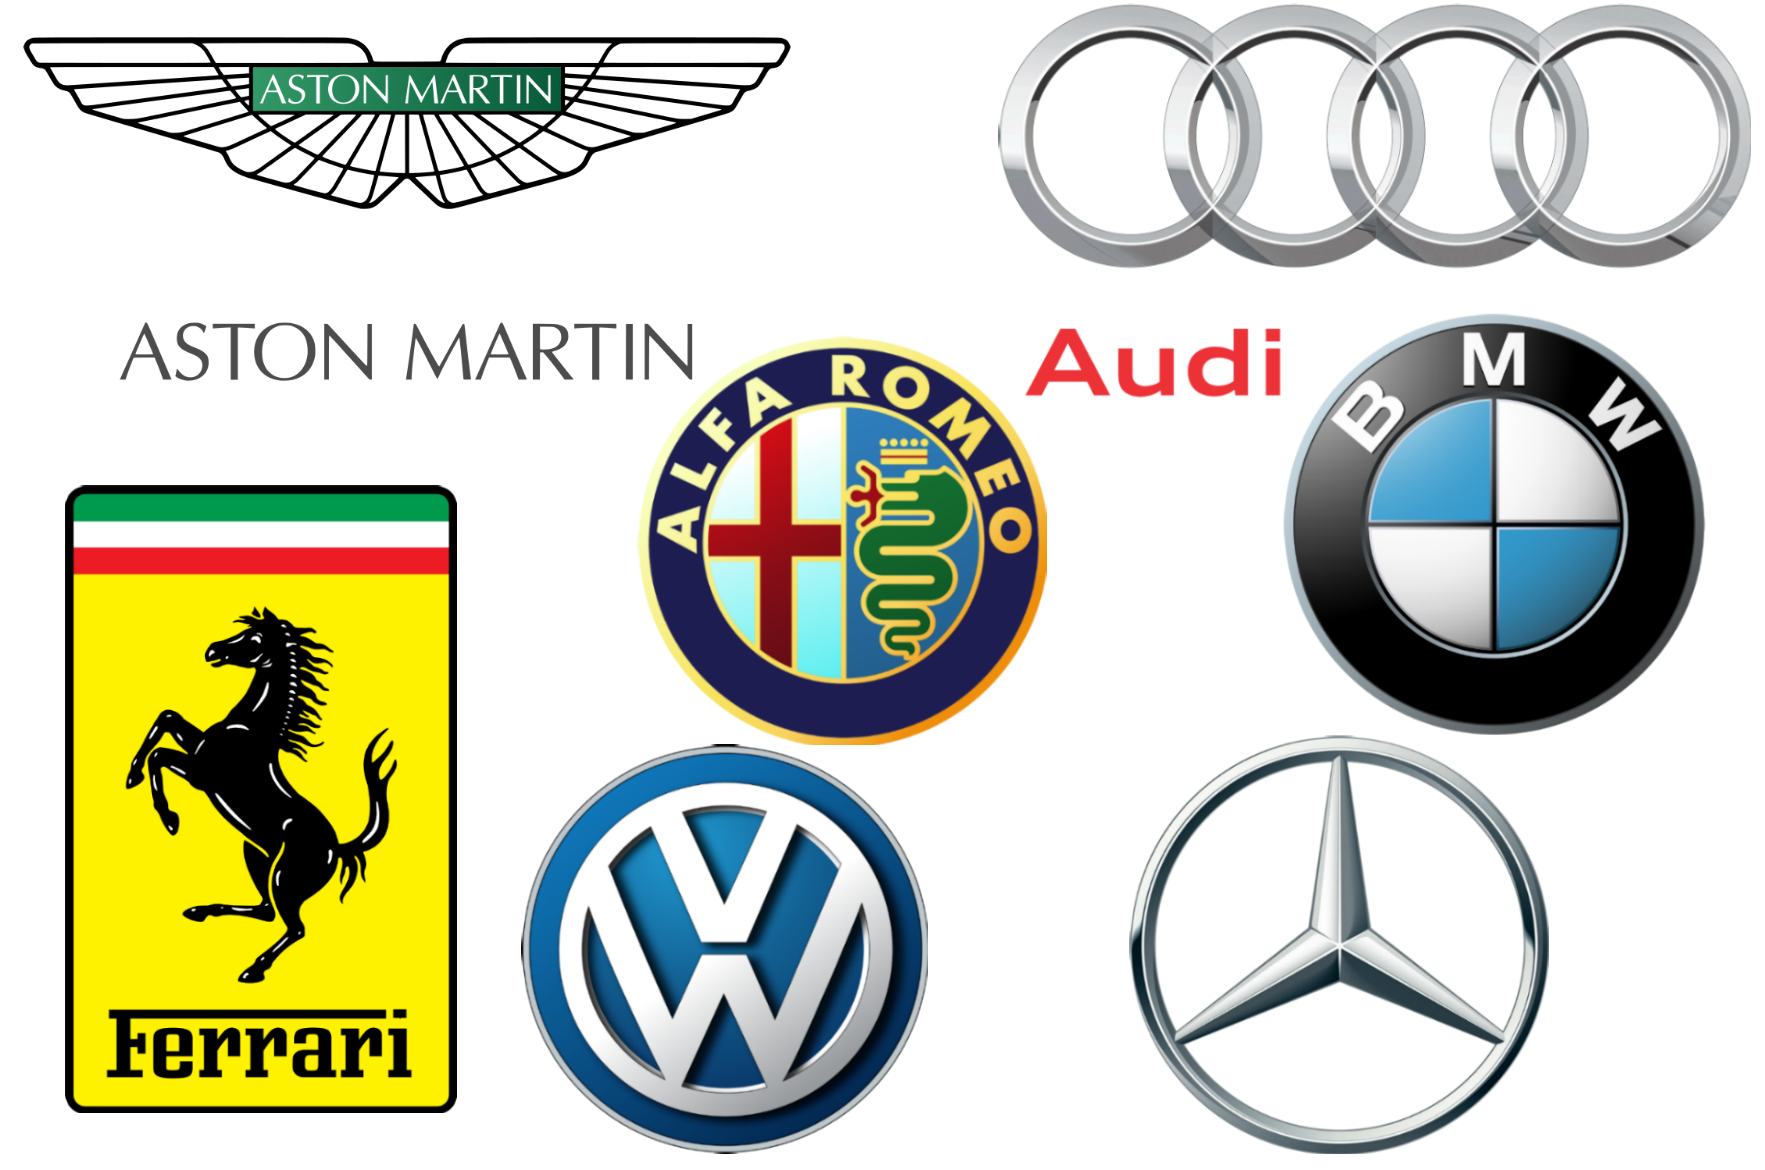 European Car Brands Companies And Manufacturers Car Brands Car Logos Meaning And Symbol